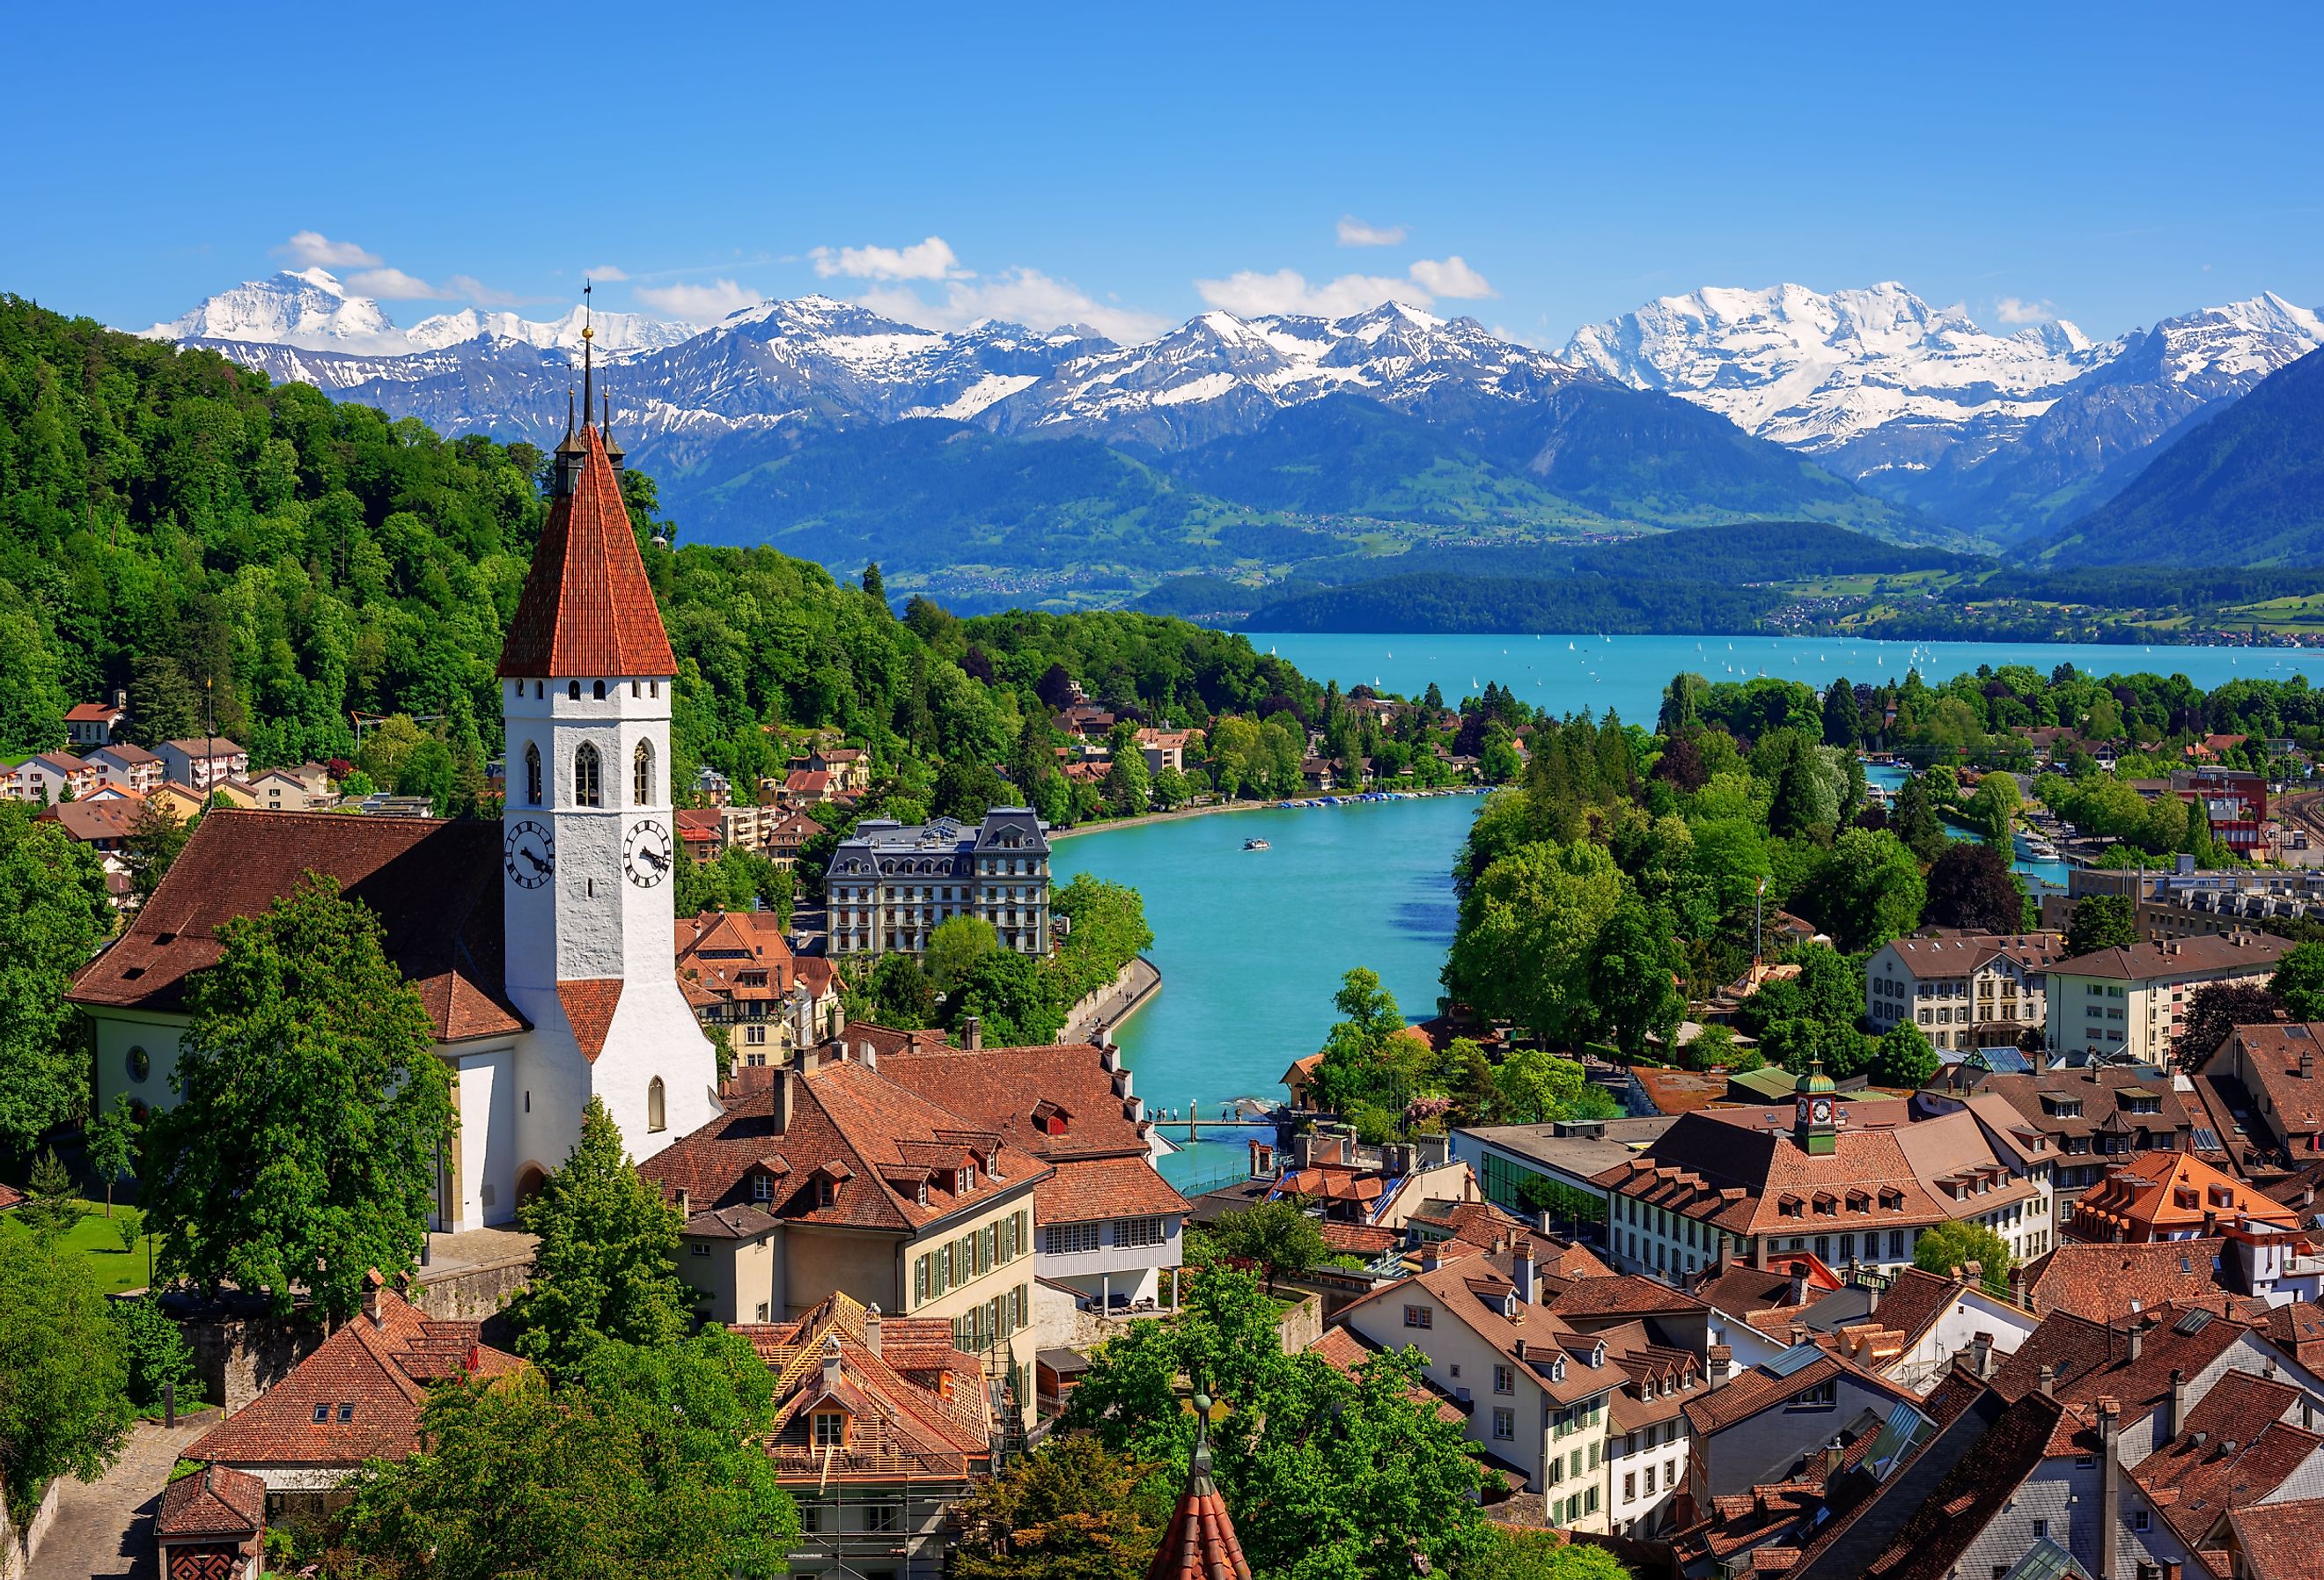 Historical Thun city and Lake Thun with snow covered Bernese Highlands Swiss Alps mountains in background, Canton Bern, Switzerland.